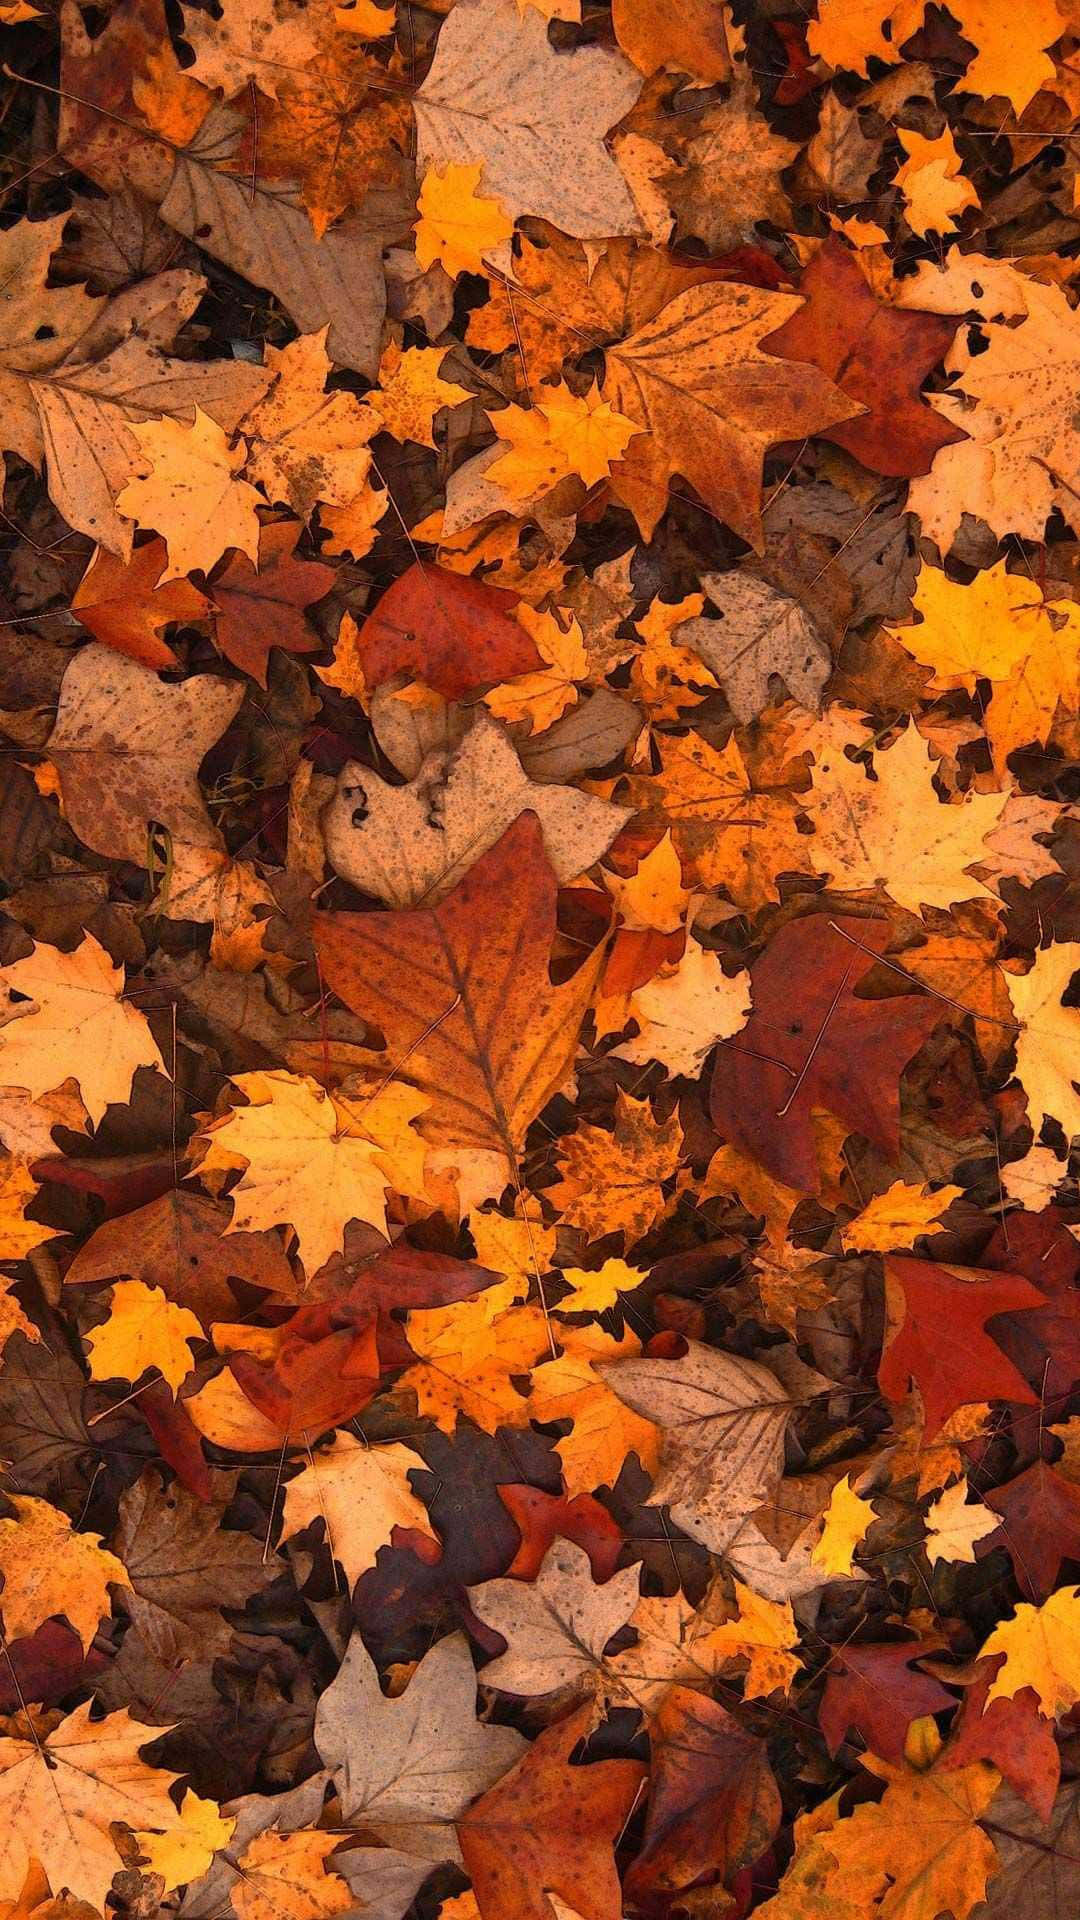 "Immerse Yourself in the Colors of Fall" Wallpaper